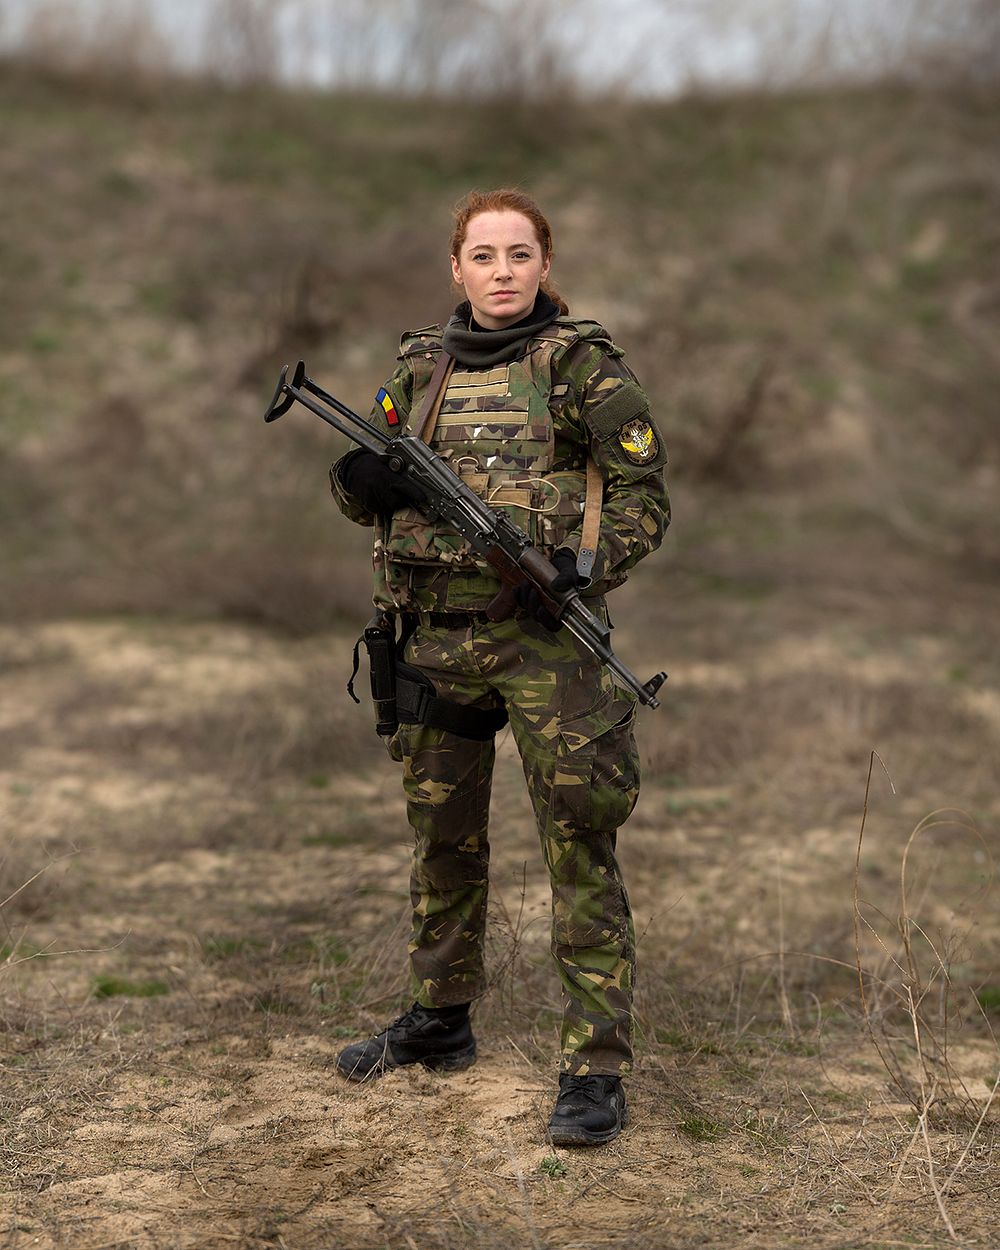 CAPU MIDIA, ROMANIA (March 20, 2017)&mdash; Romanian Sailor Cpl. Pintilie Madalina, a communications specialist, poses for a…